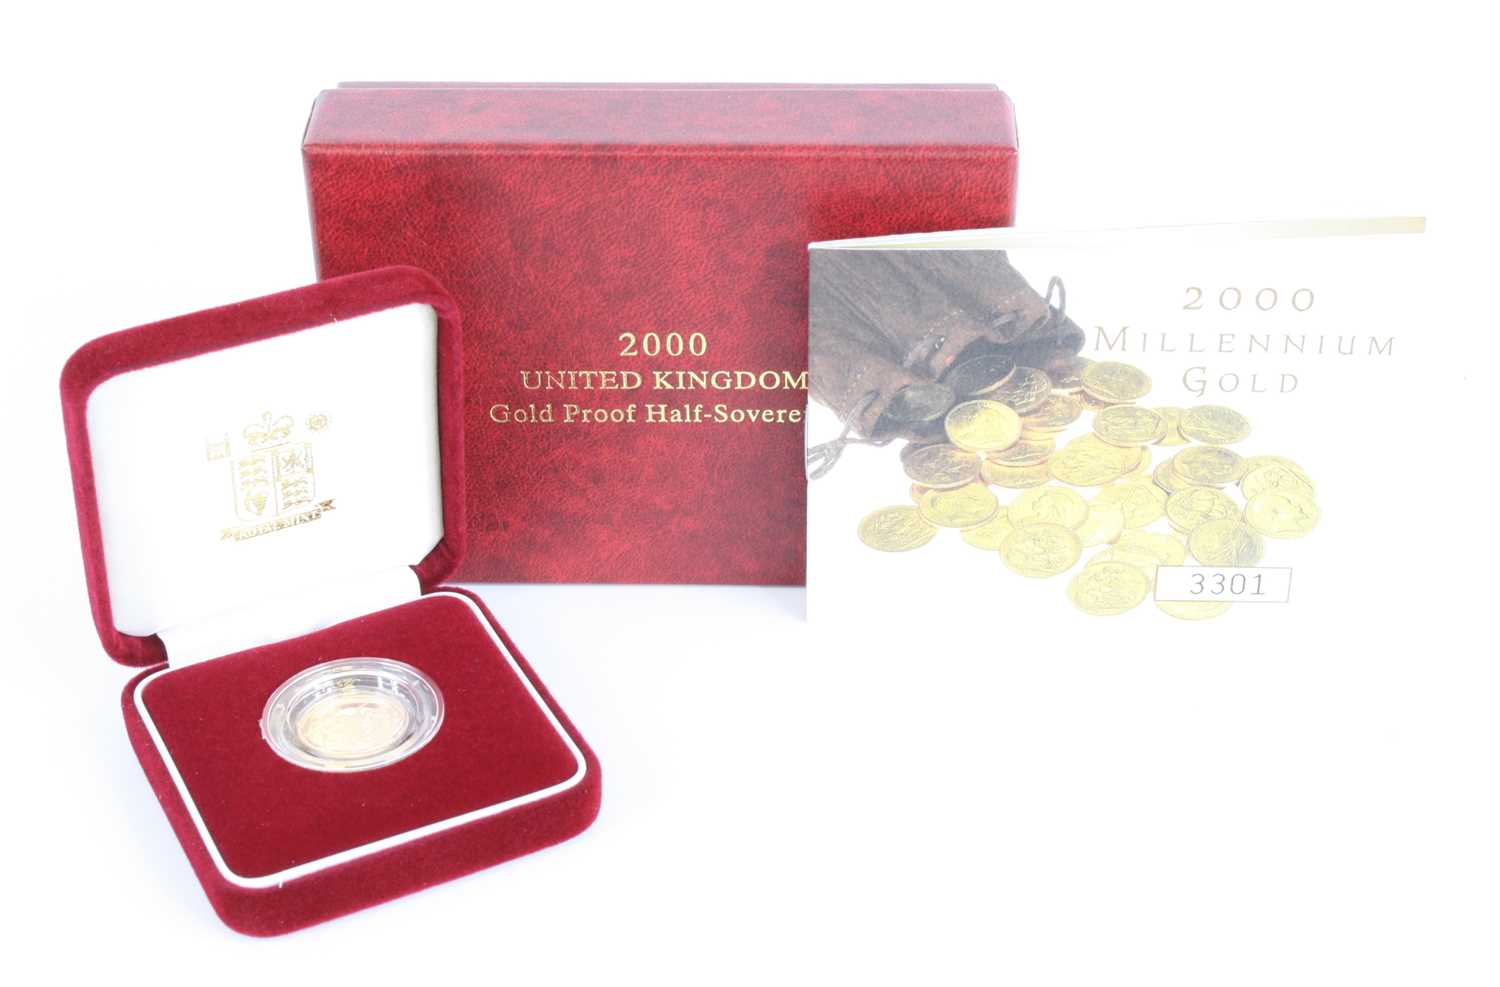 Great Britain, 2000 Millennium gold proof half sovereign, cased with certificate no. 3301, in card